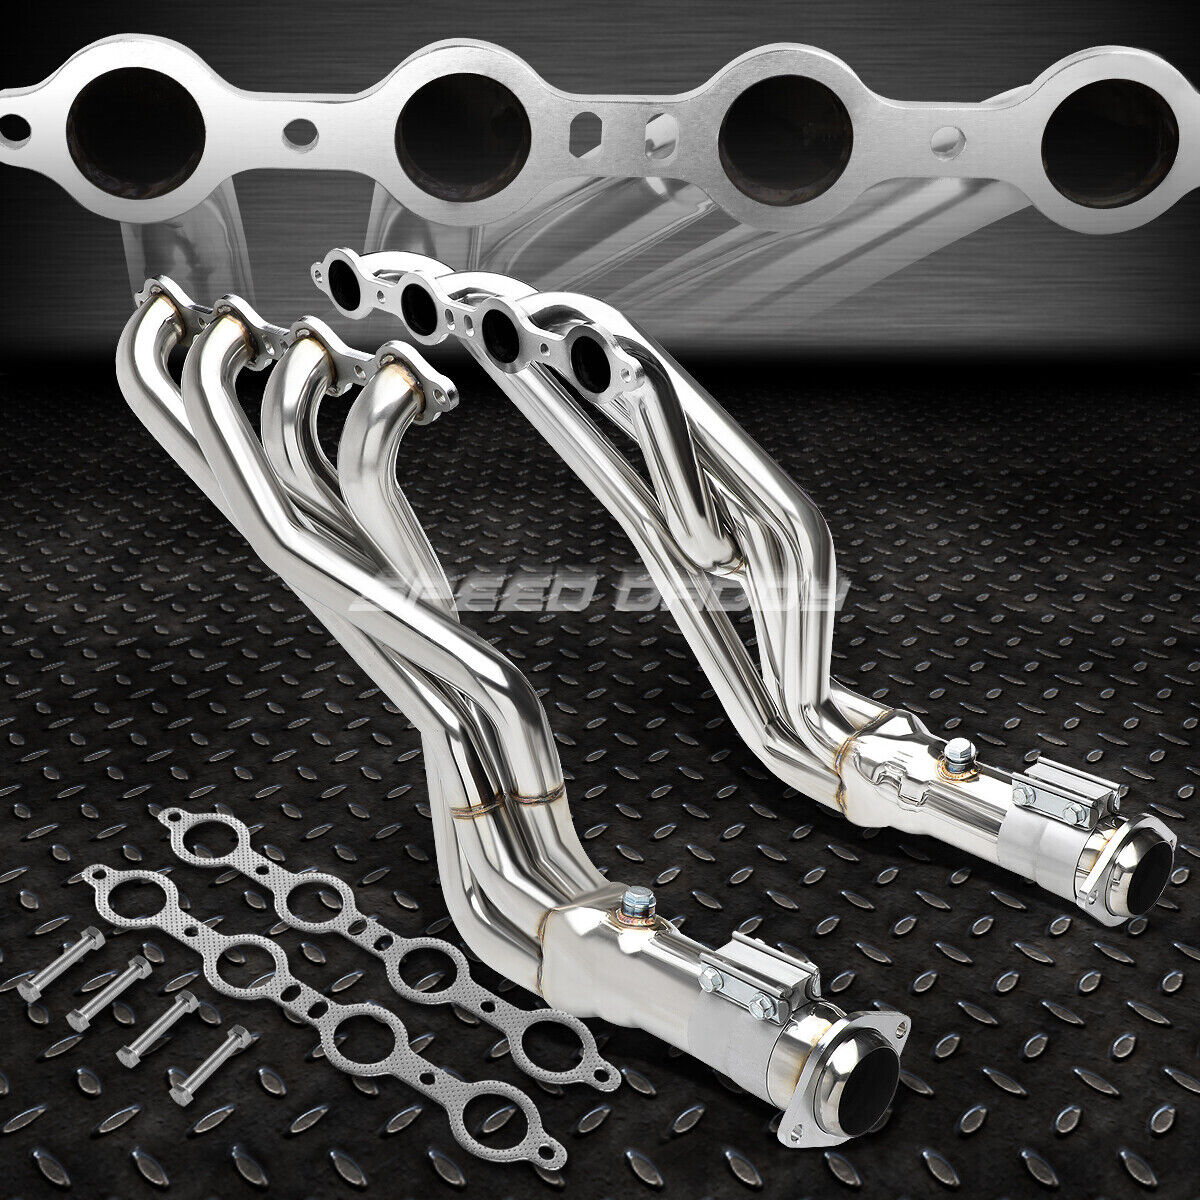 For 04-07 Cadillac Cts-V V8 Sedan First Gen Stainless Steel 4-1 Exhaust Header